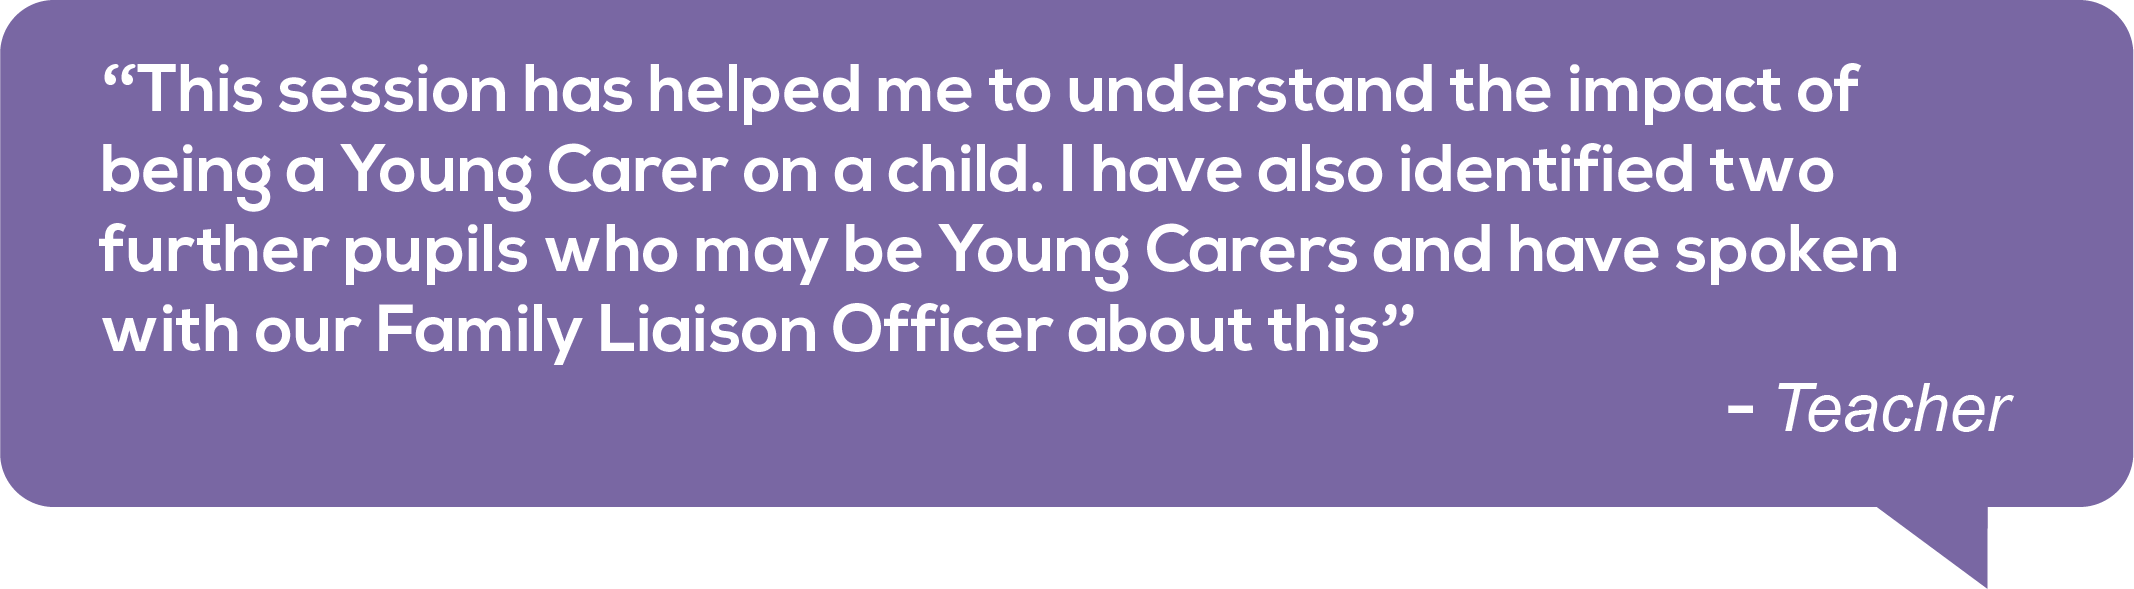 Quote from a Teacher: This session has helped me to understand the impact of being a Young Carer on a child. I have also identified two further pupils who may be Young Carers and have spoken with our Family Liaison Officer about this